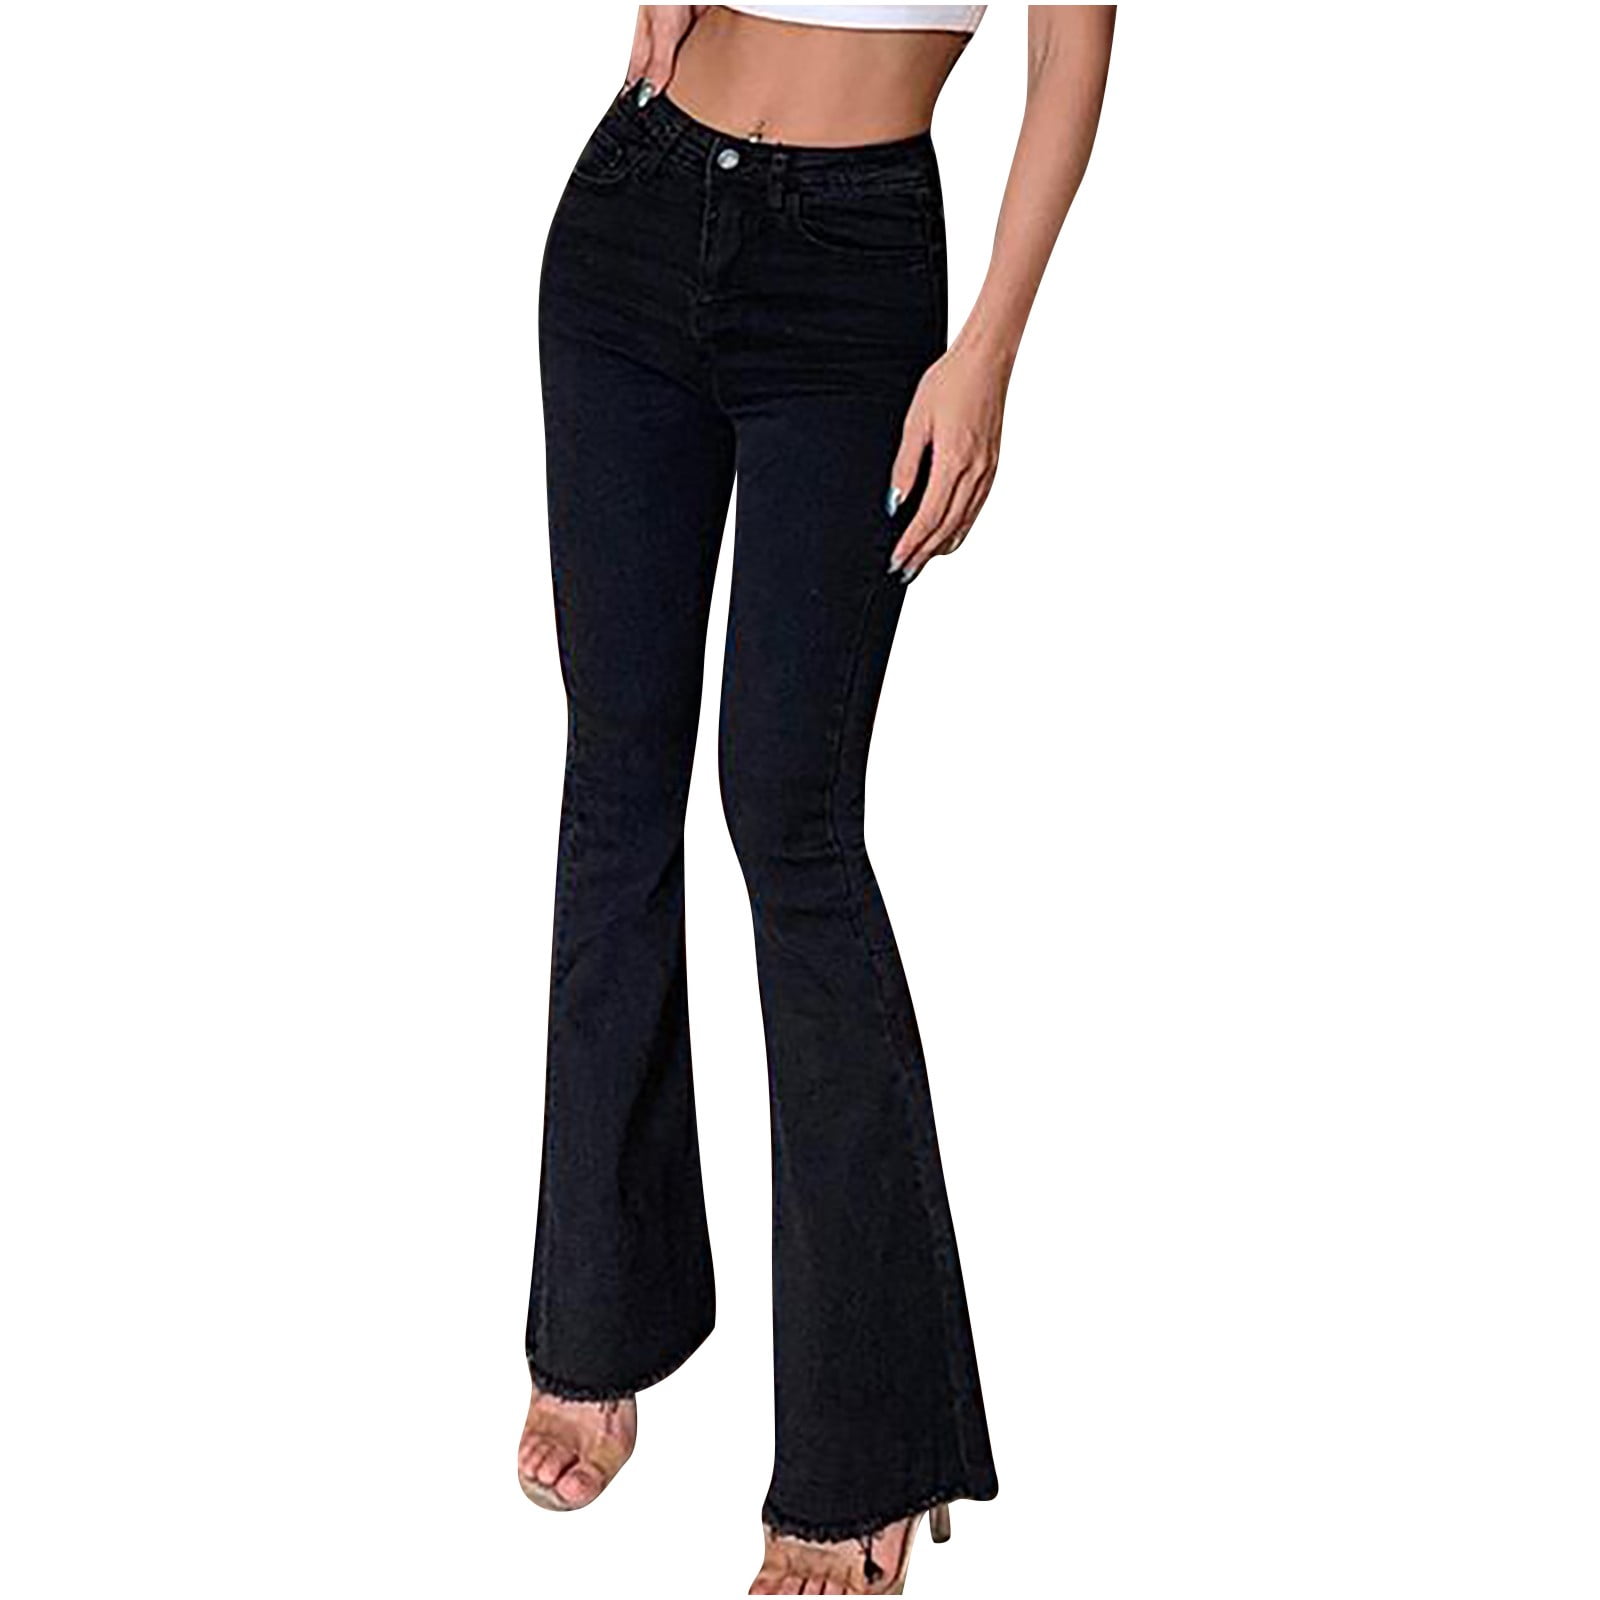 Bell Bottom Jeans for Women, Trendy High Waisted Stretch Flare Denim Pants  Butt Lifting Skinny Solid Color Trousers Black